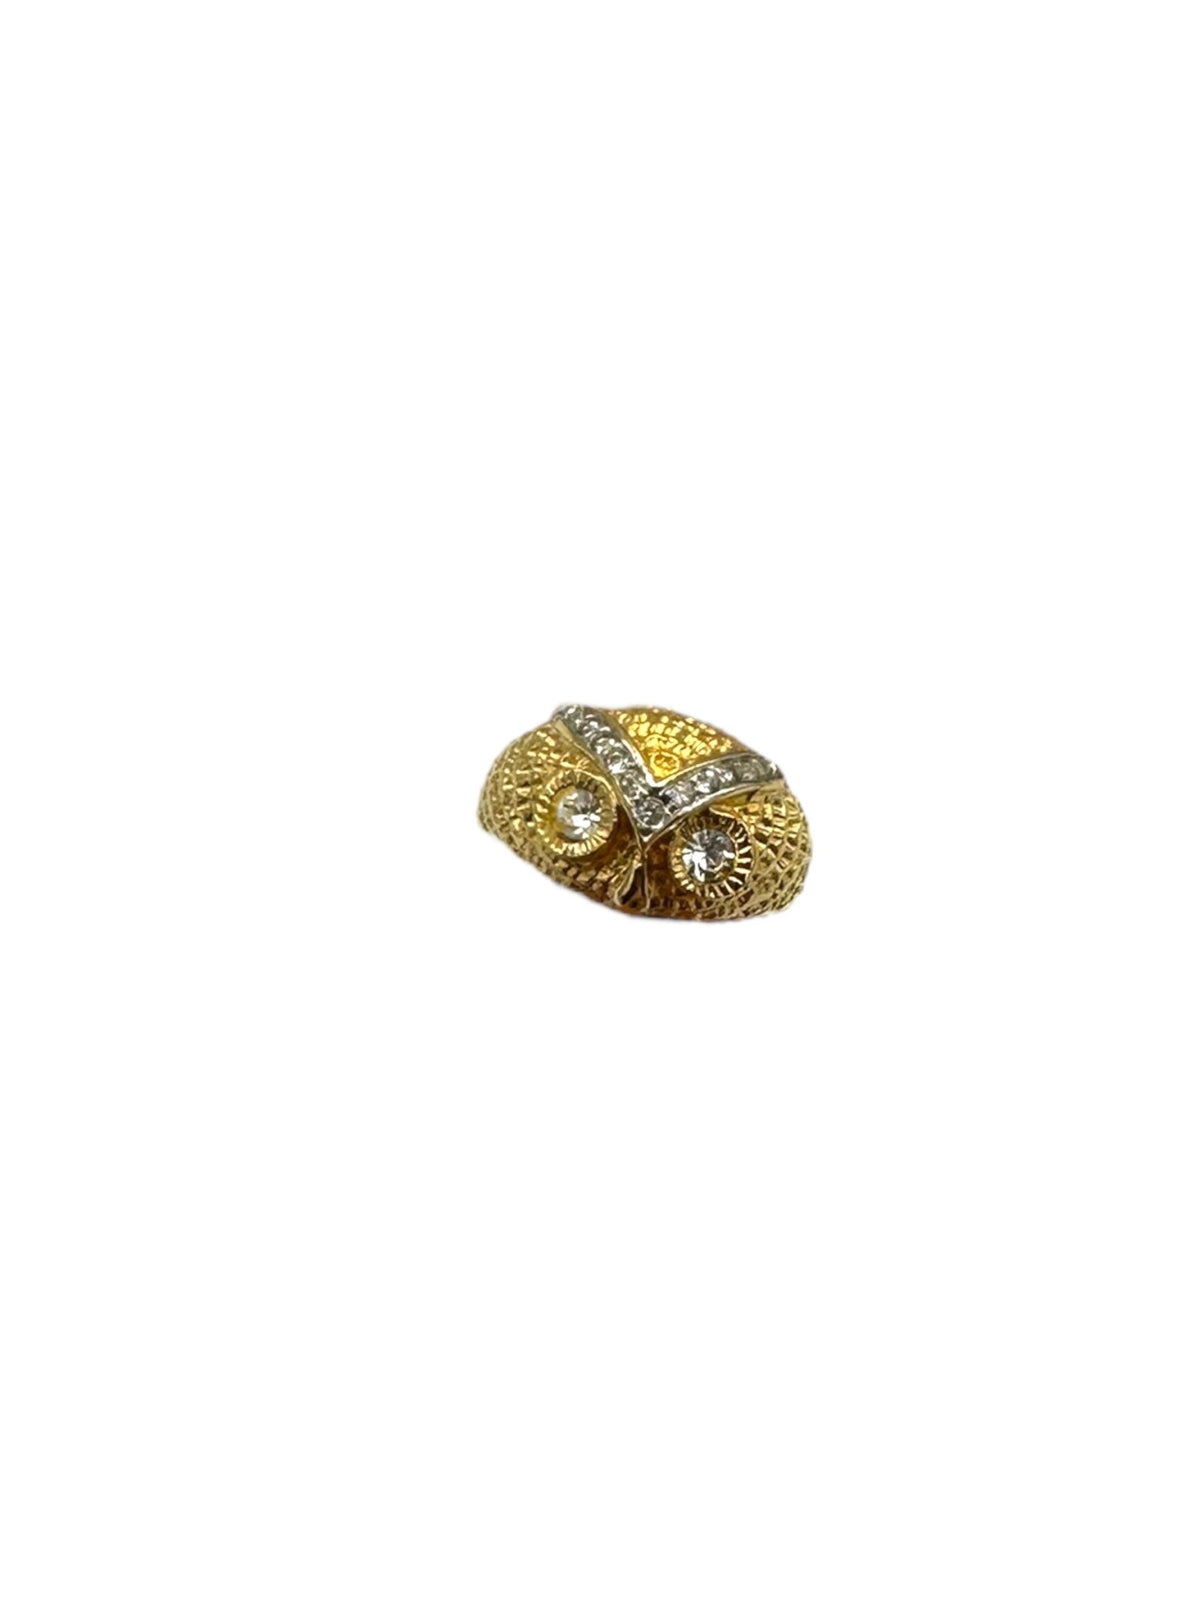 Joan Rivers Jewelry Gold Owl Vintage Cocktail Ring - 24 Wishes Vintage Jewelry